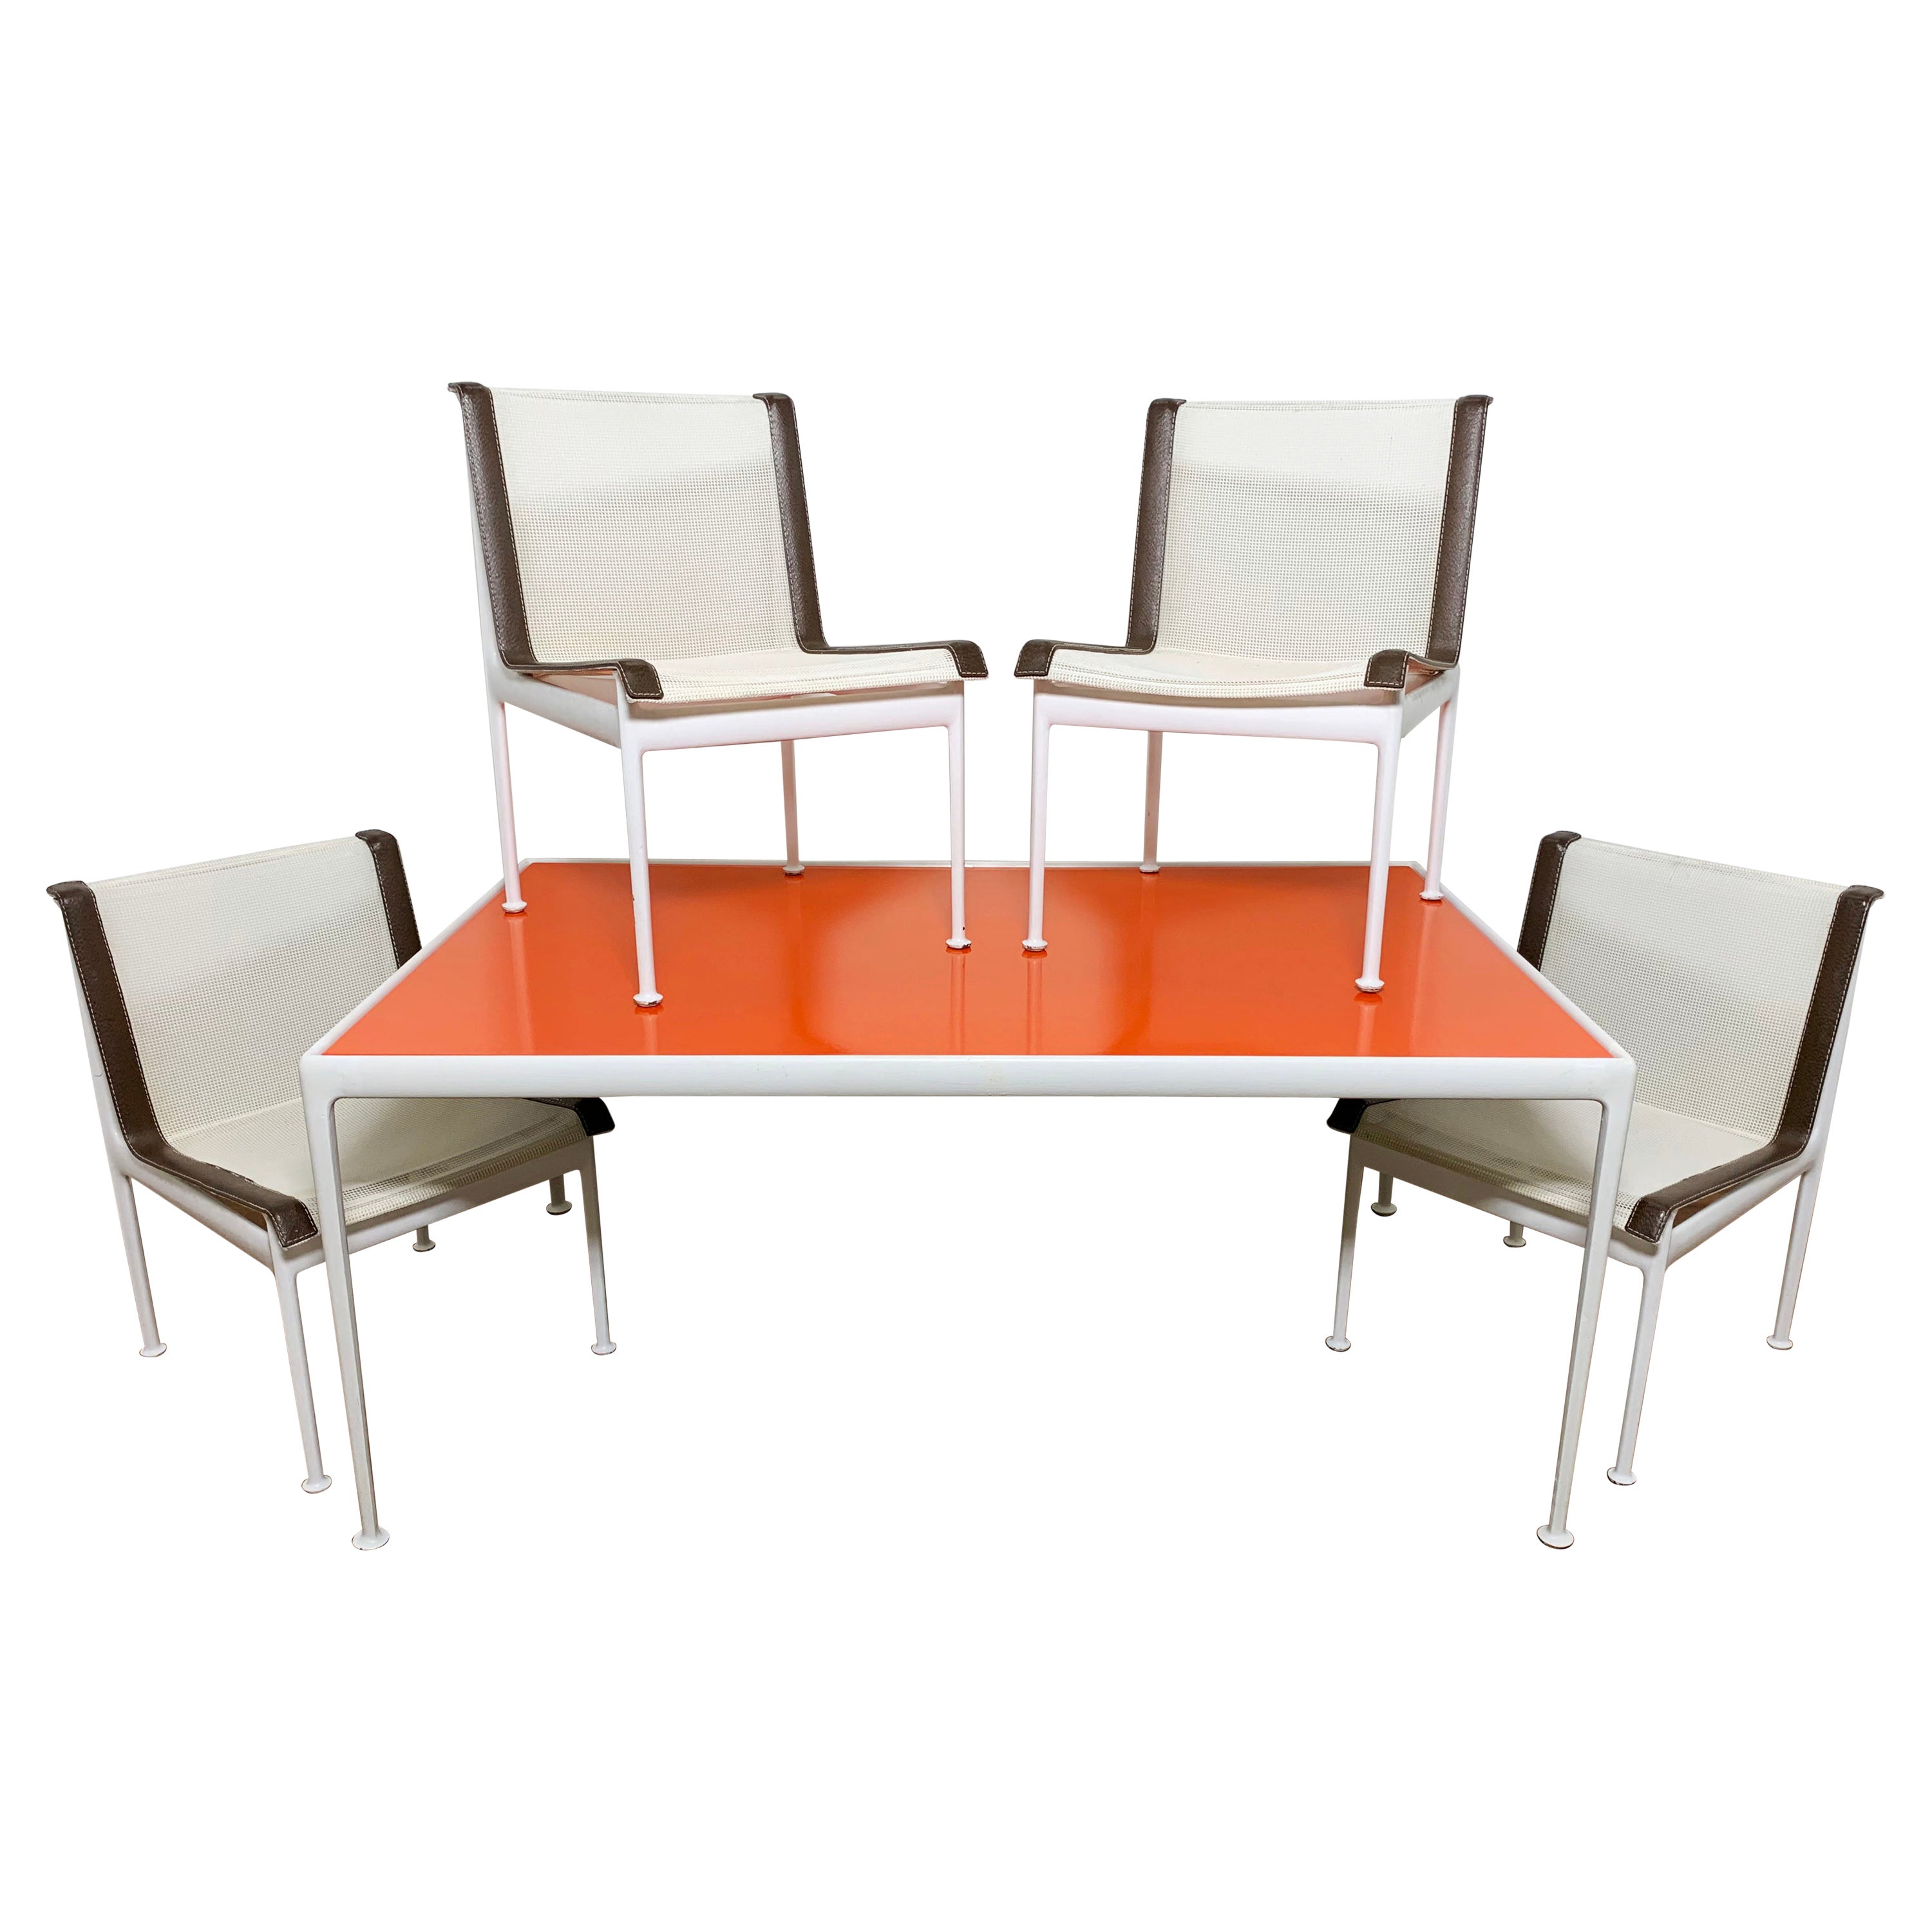 Original Richard Schultz for Knoll 1966 Series Dining Table, Set of Four Chairs